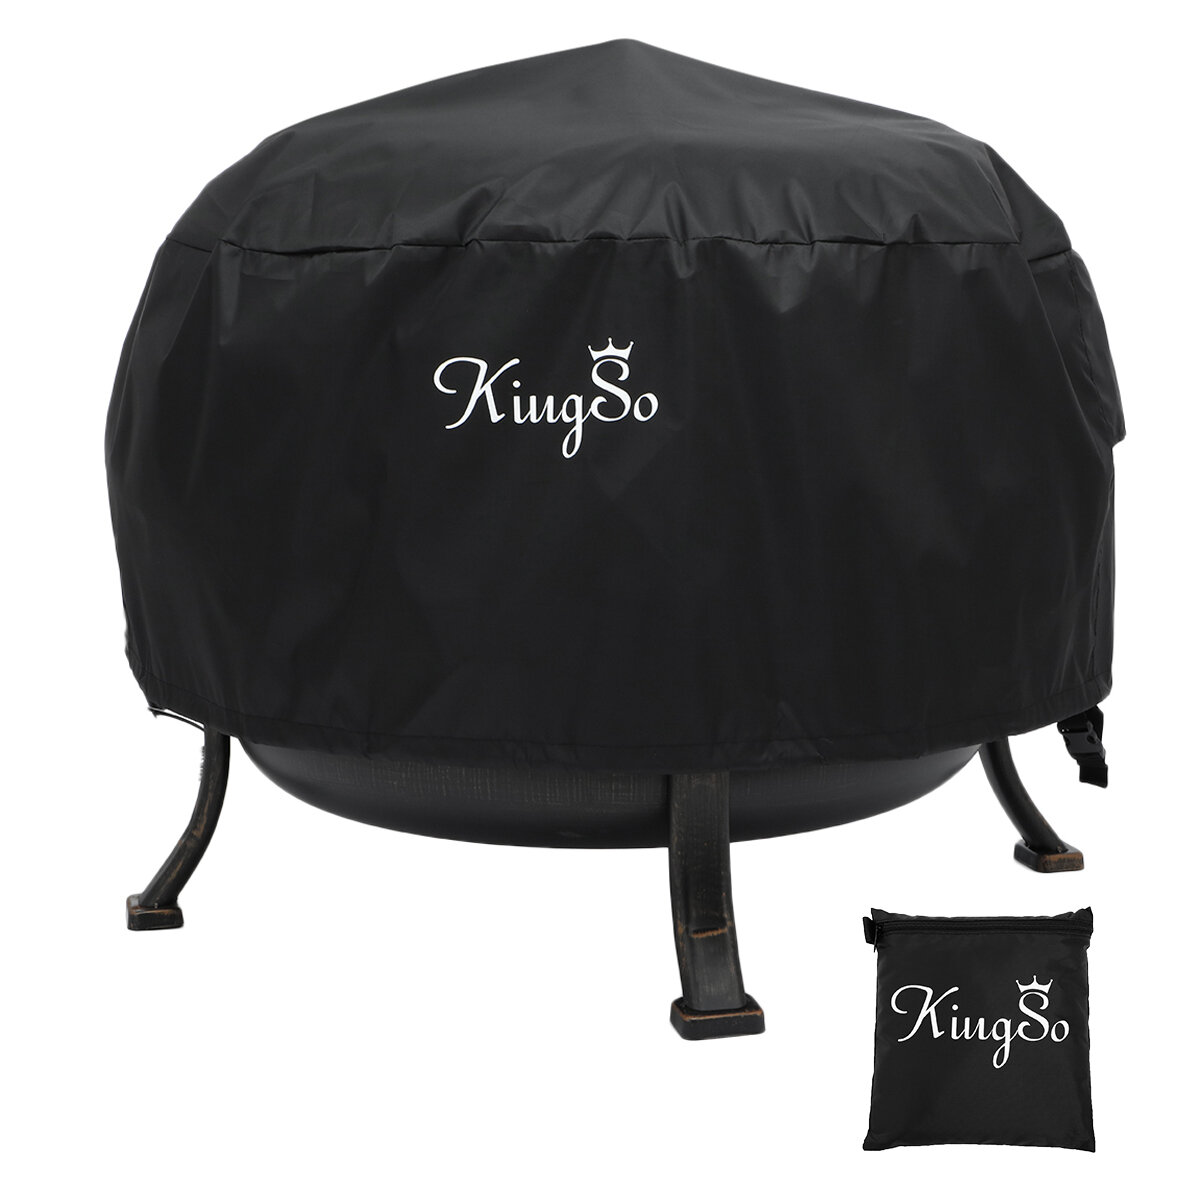 Kingso 36 Inch Round Fire Pit Cover, 36 Round Fire Pit Cover